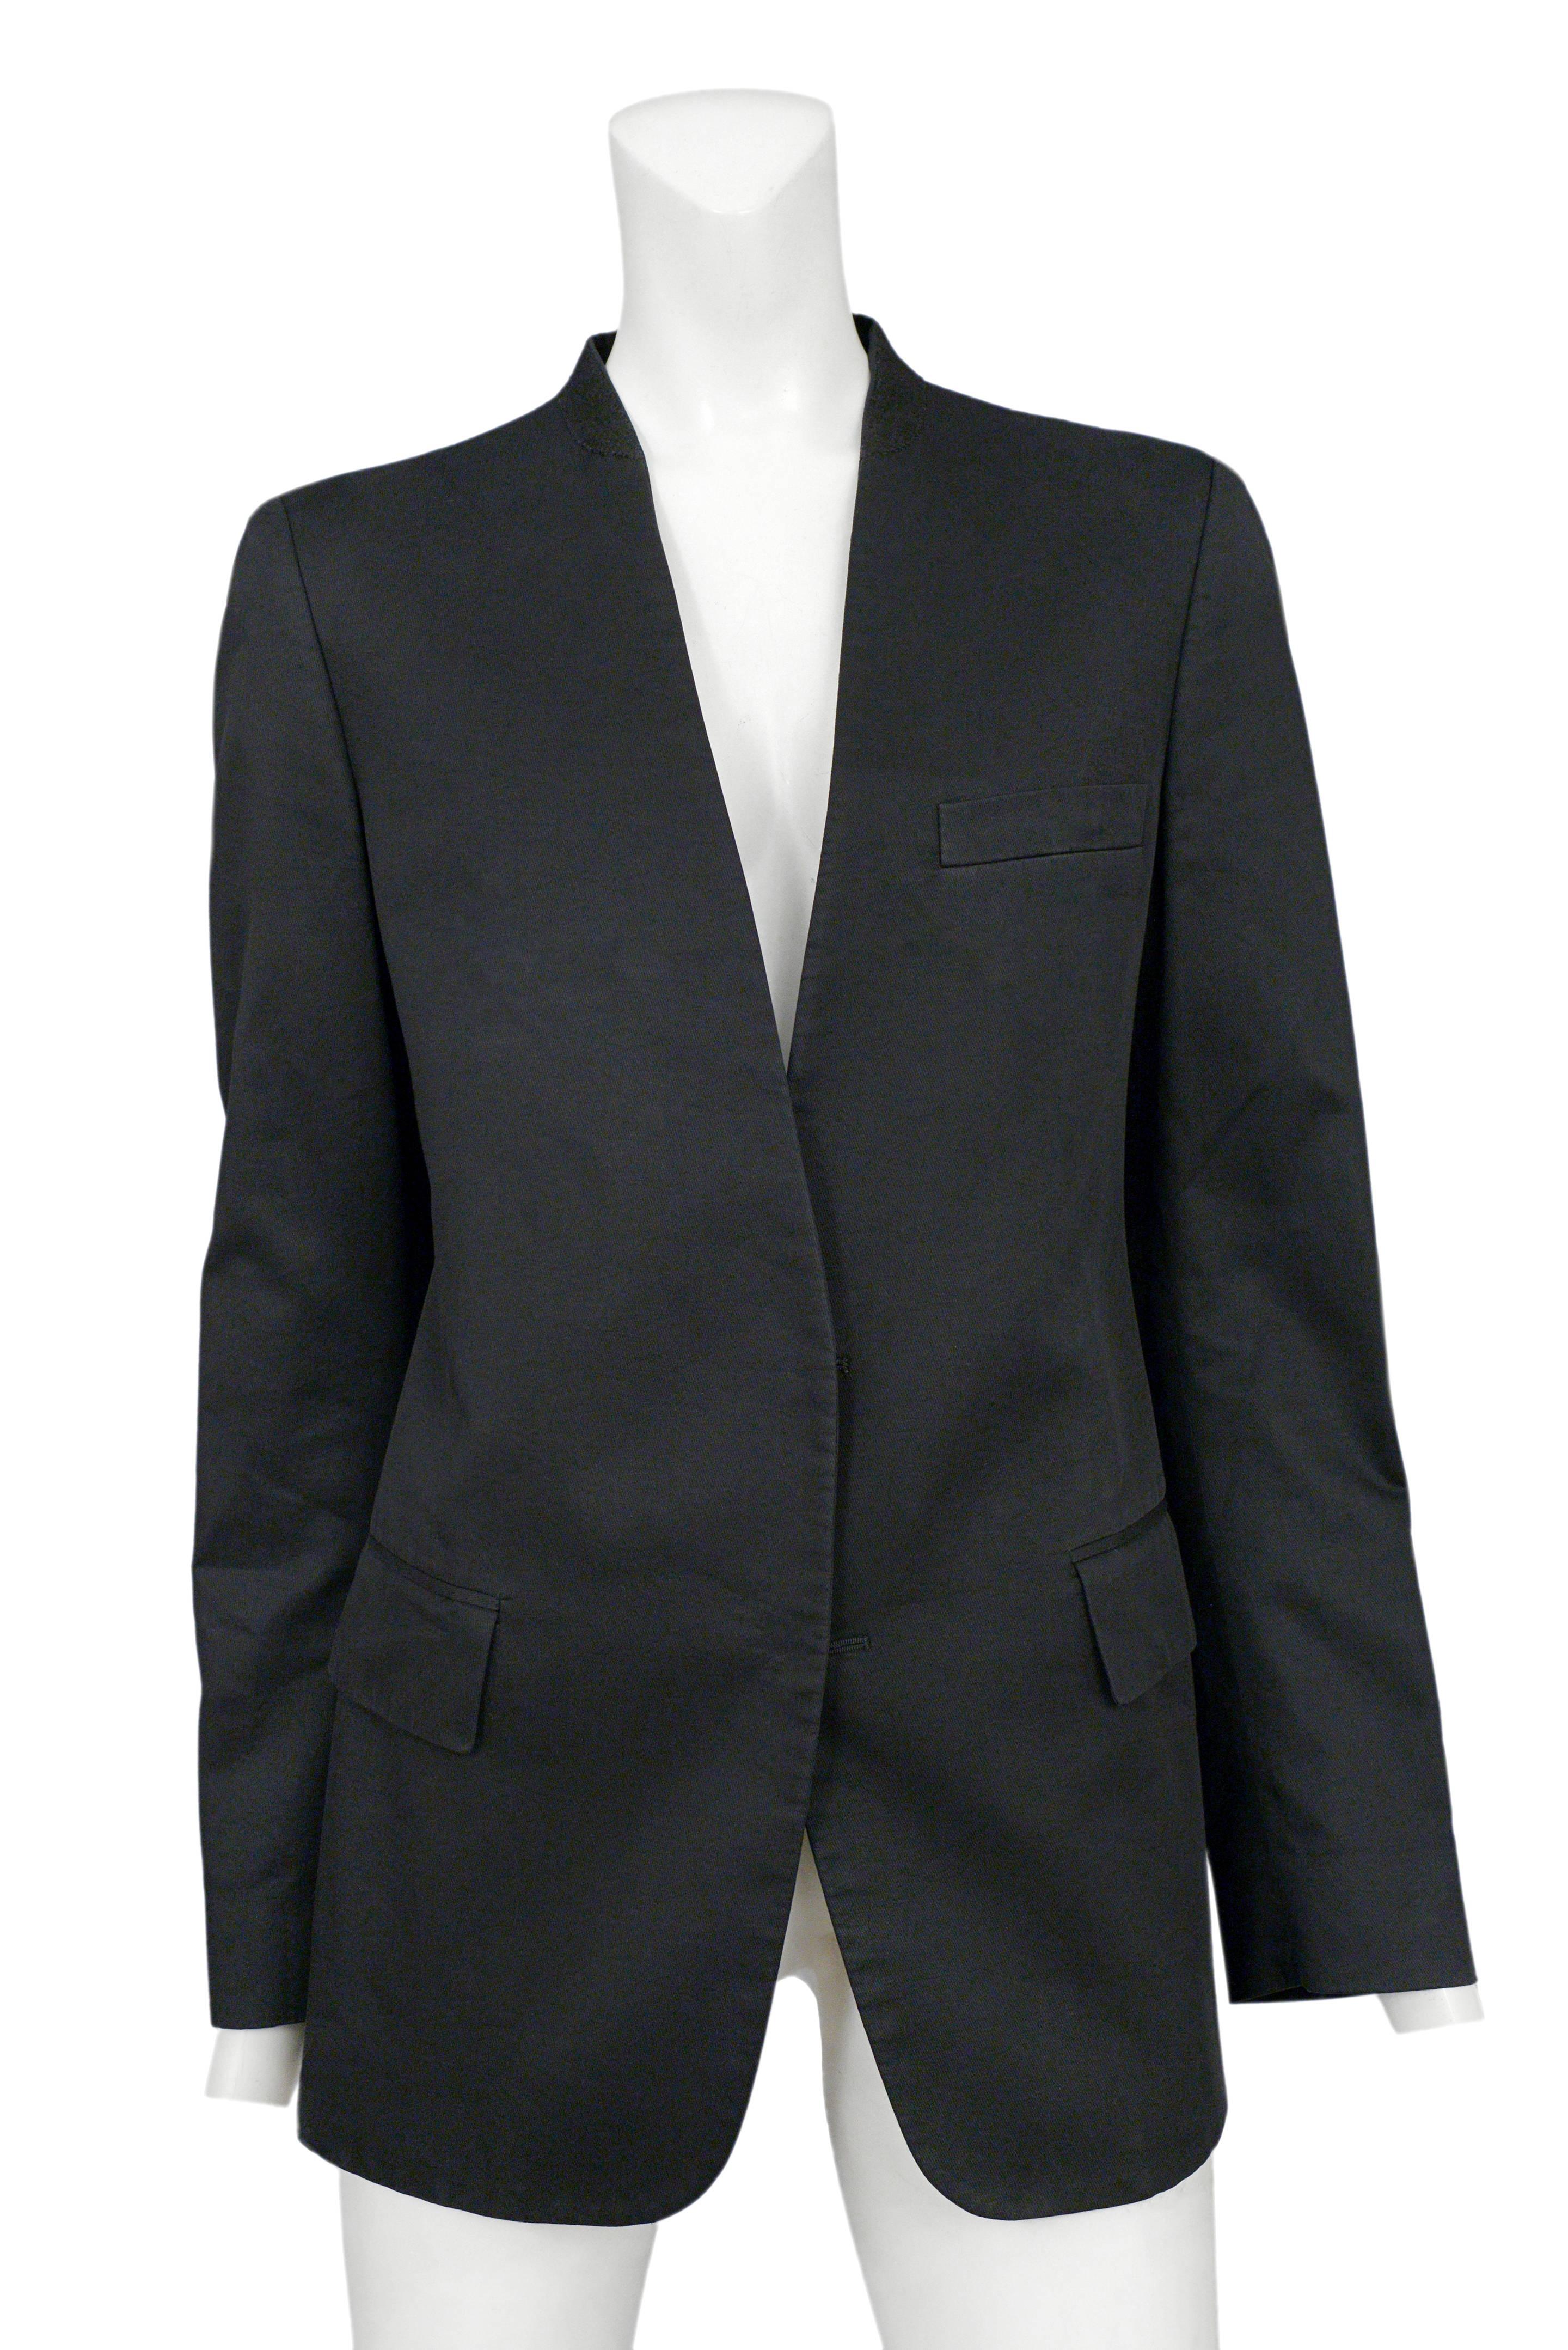 Vintage Maison Martin Margiela collarless black blazer featuring hidden buttons at the front and side pockets.
Please inquire for additional images.